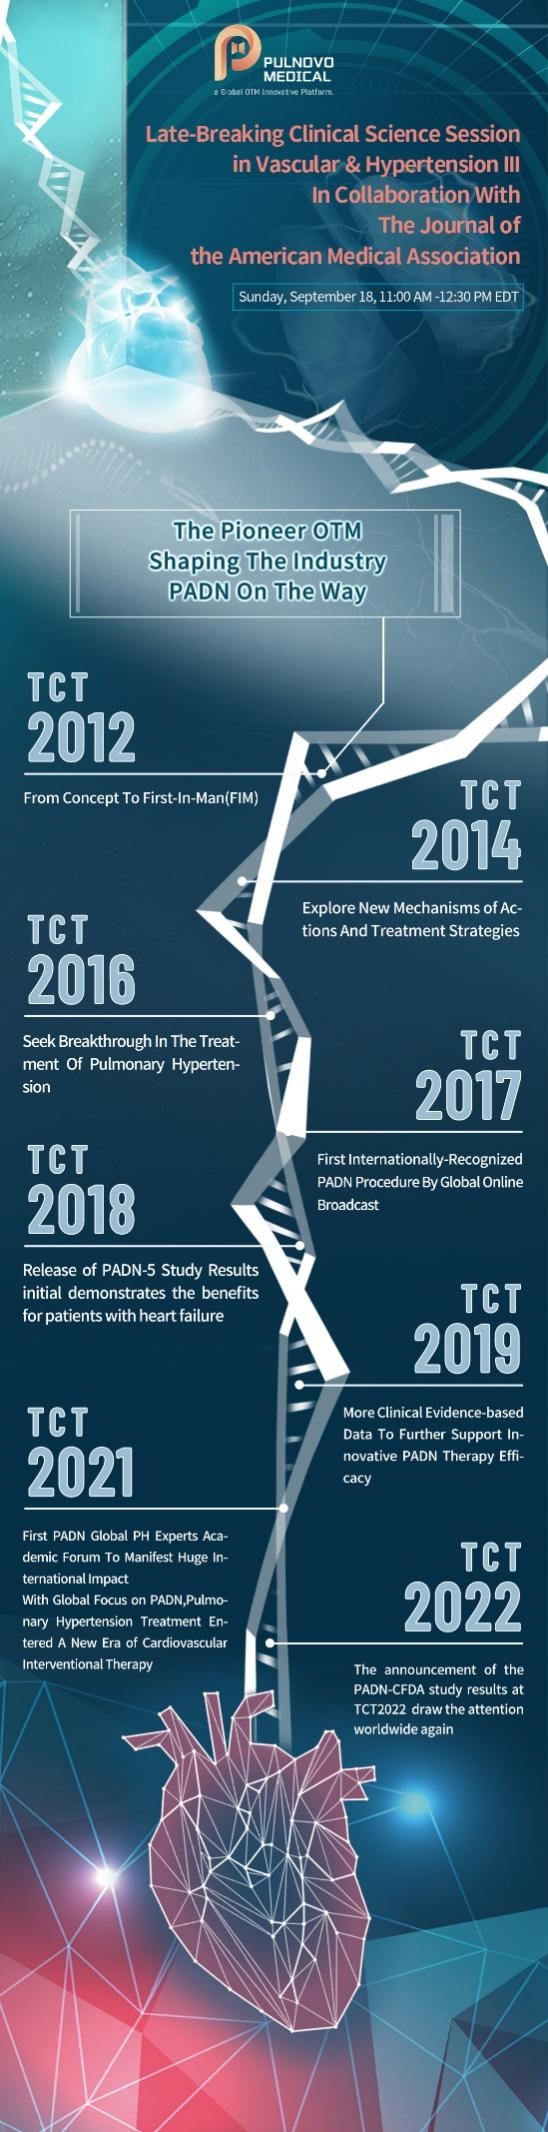 TCT2022| Pulnovo Medical Announced That The Latest Results Of PADN-CFDA Pivotal Trial Indicate Effectiveness And Safety of PADN For The Treatment Of Pulmonary Arterial Hypertension (PAH)(图1)